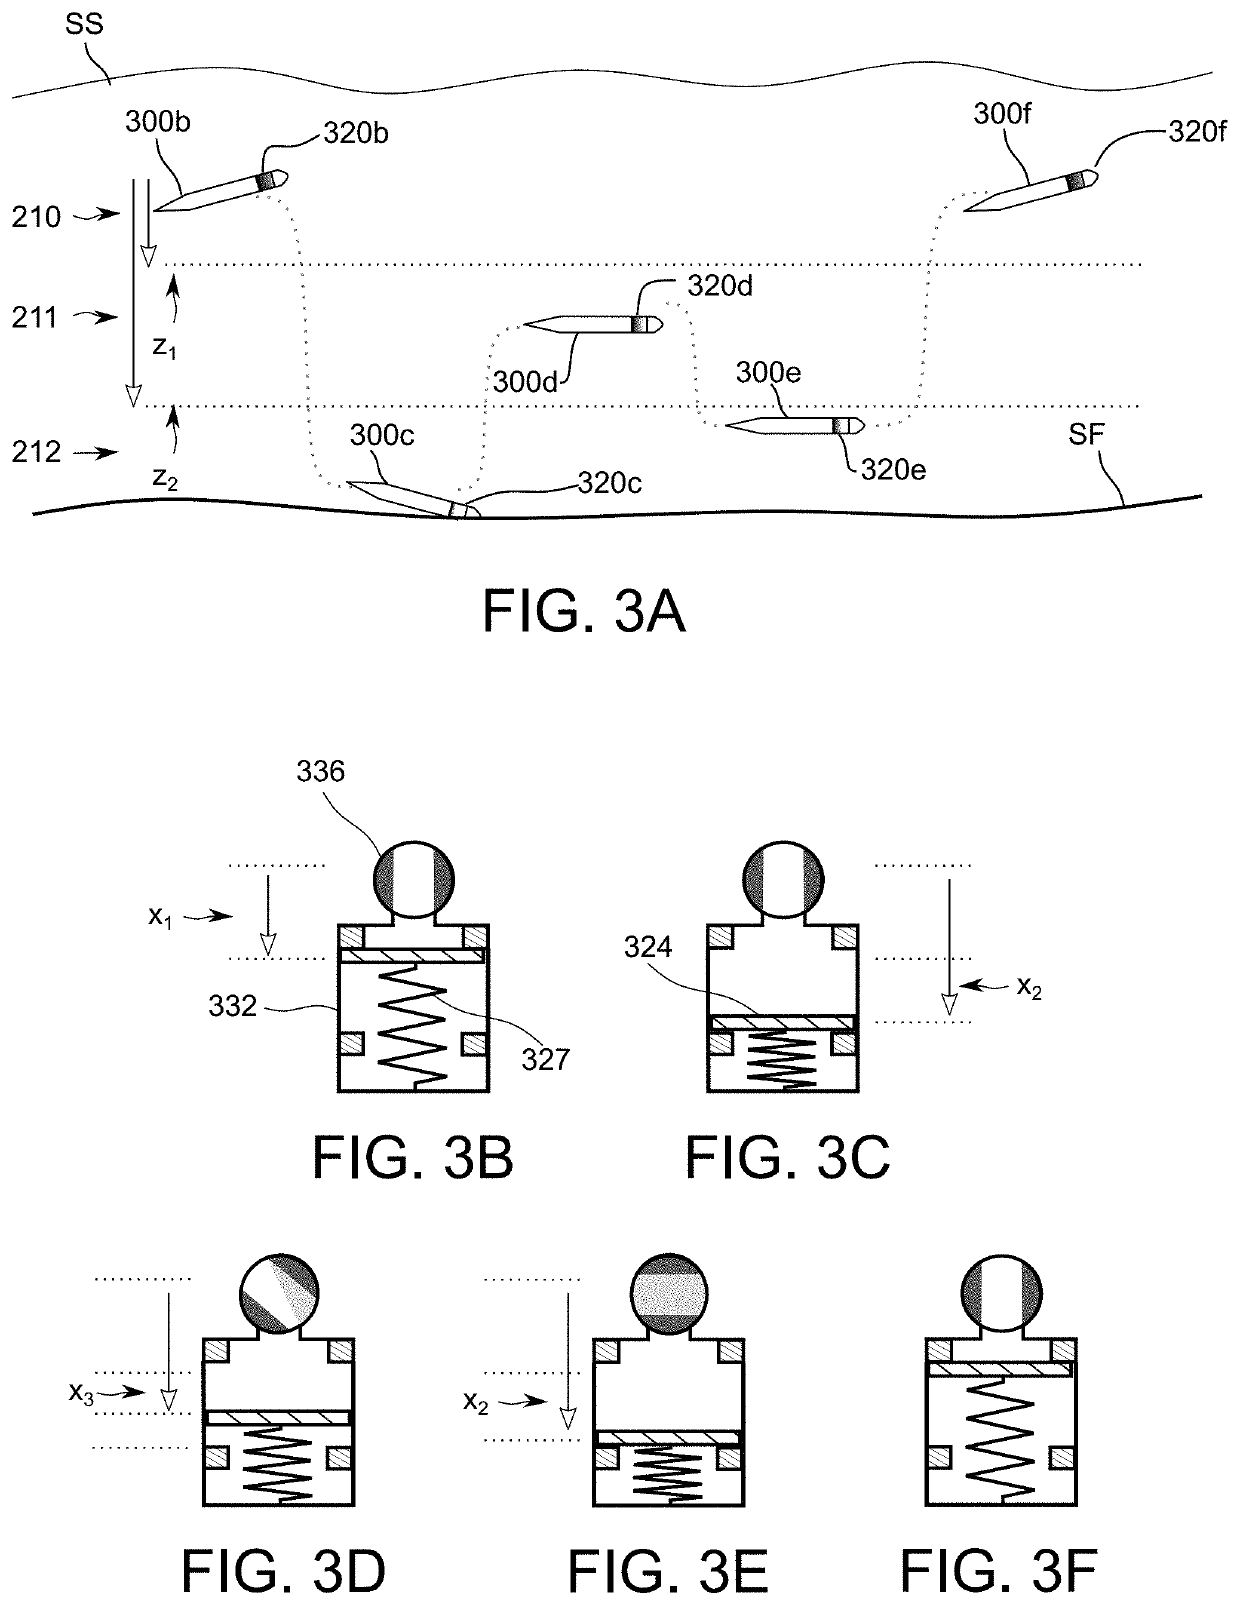 Passive ballast device, system and methods of using same